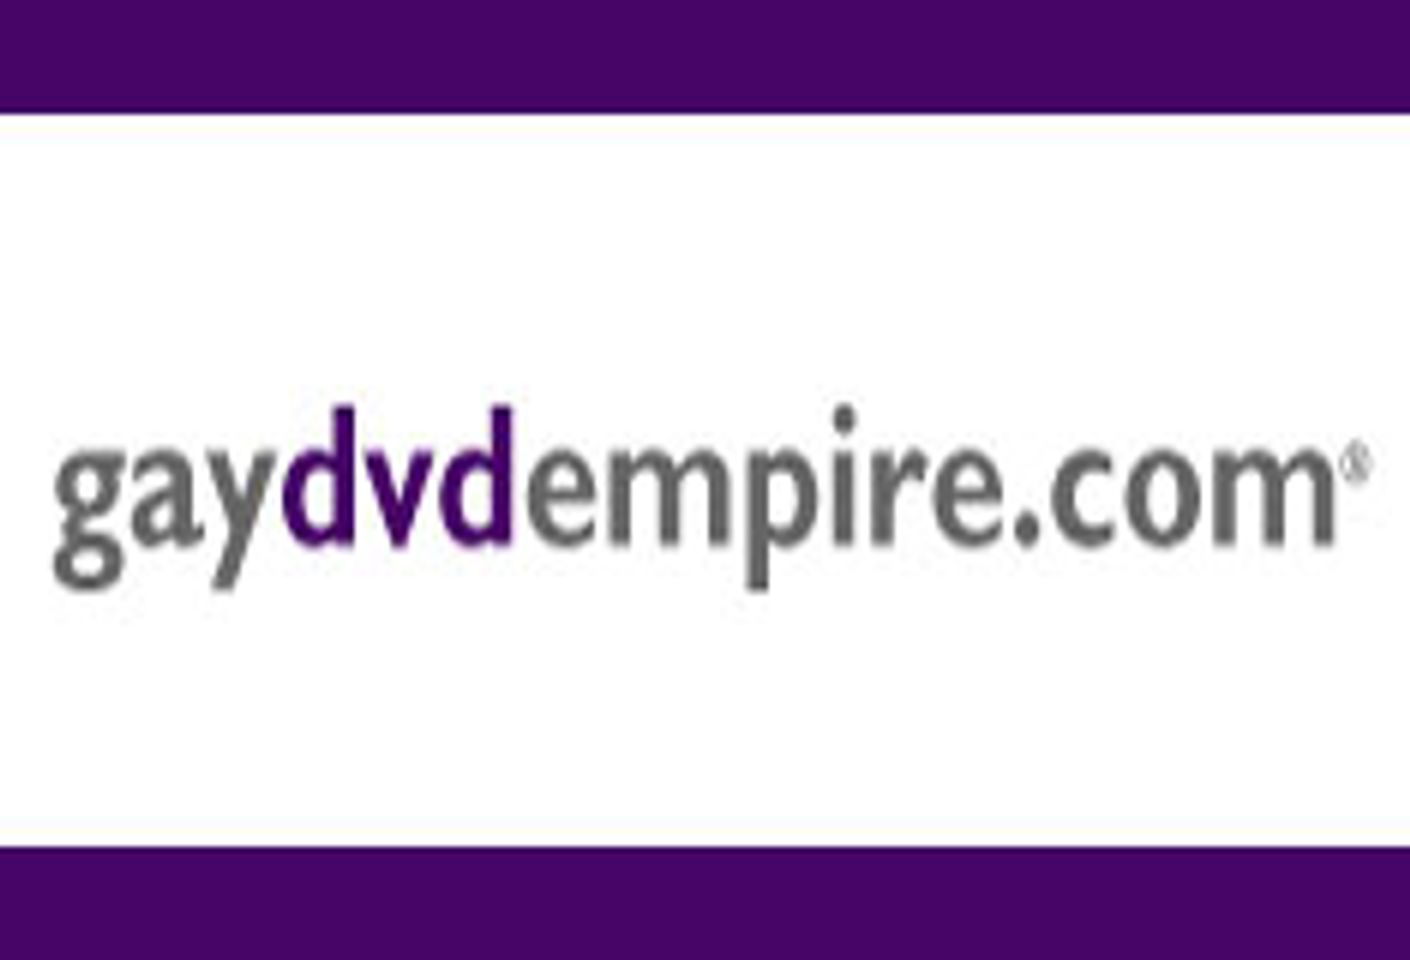 Adult Dvd Empire Launches Gay Adult Dvd Rentals Avn